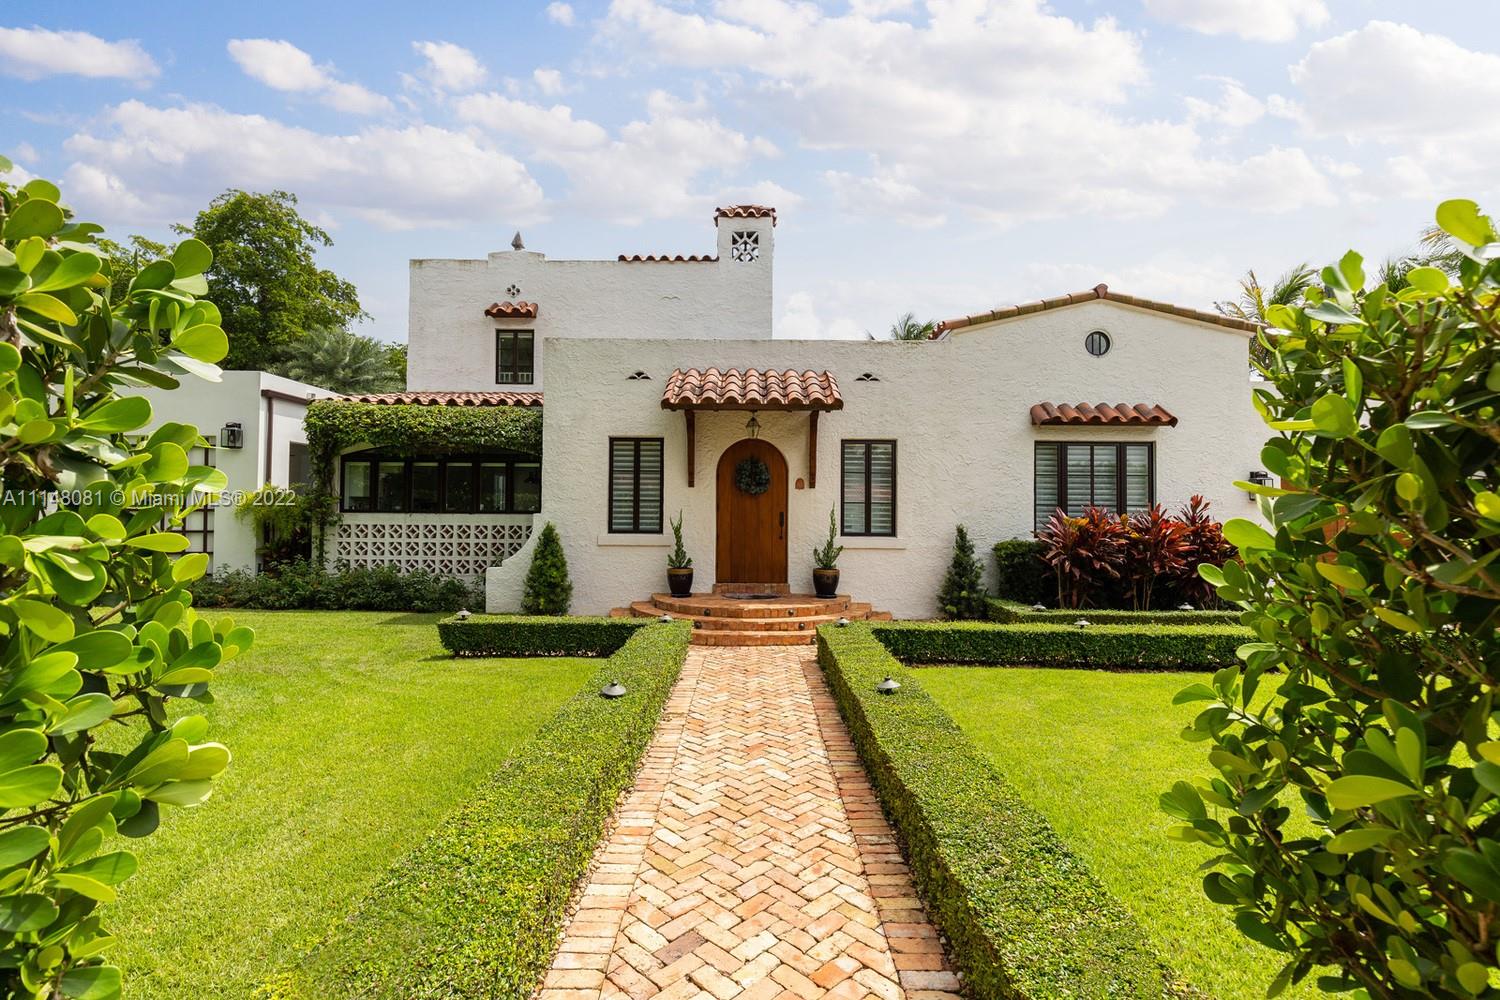 This magnificent Old Spanish gem was completely renovated in 2017. With exquisite architectural details and features that include all hurricane-resistant Pella windows, all mahogany wood interior doors, a custom-designed 500 bottle wine cellar with natural brickwork, hardwood floors throughout, stunning gourmet kitchen with Subzero, Wolf and Bosch appliances, and marble countertops. Masterful custom millwork throughout the home that includes all baseboards, crown moldings, trims, dressing rooms, closets, and more. LED lighting throughout, Savant home automation system that controls all window treatments, security system which includes 12 cameras, all lights, all audiovisual systems.